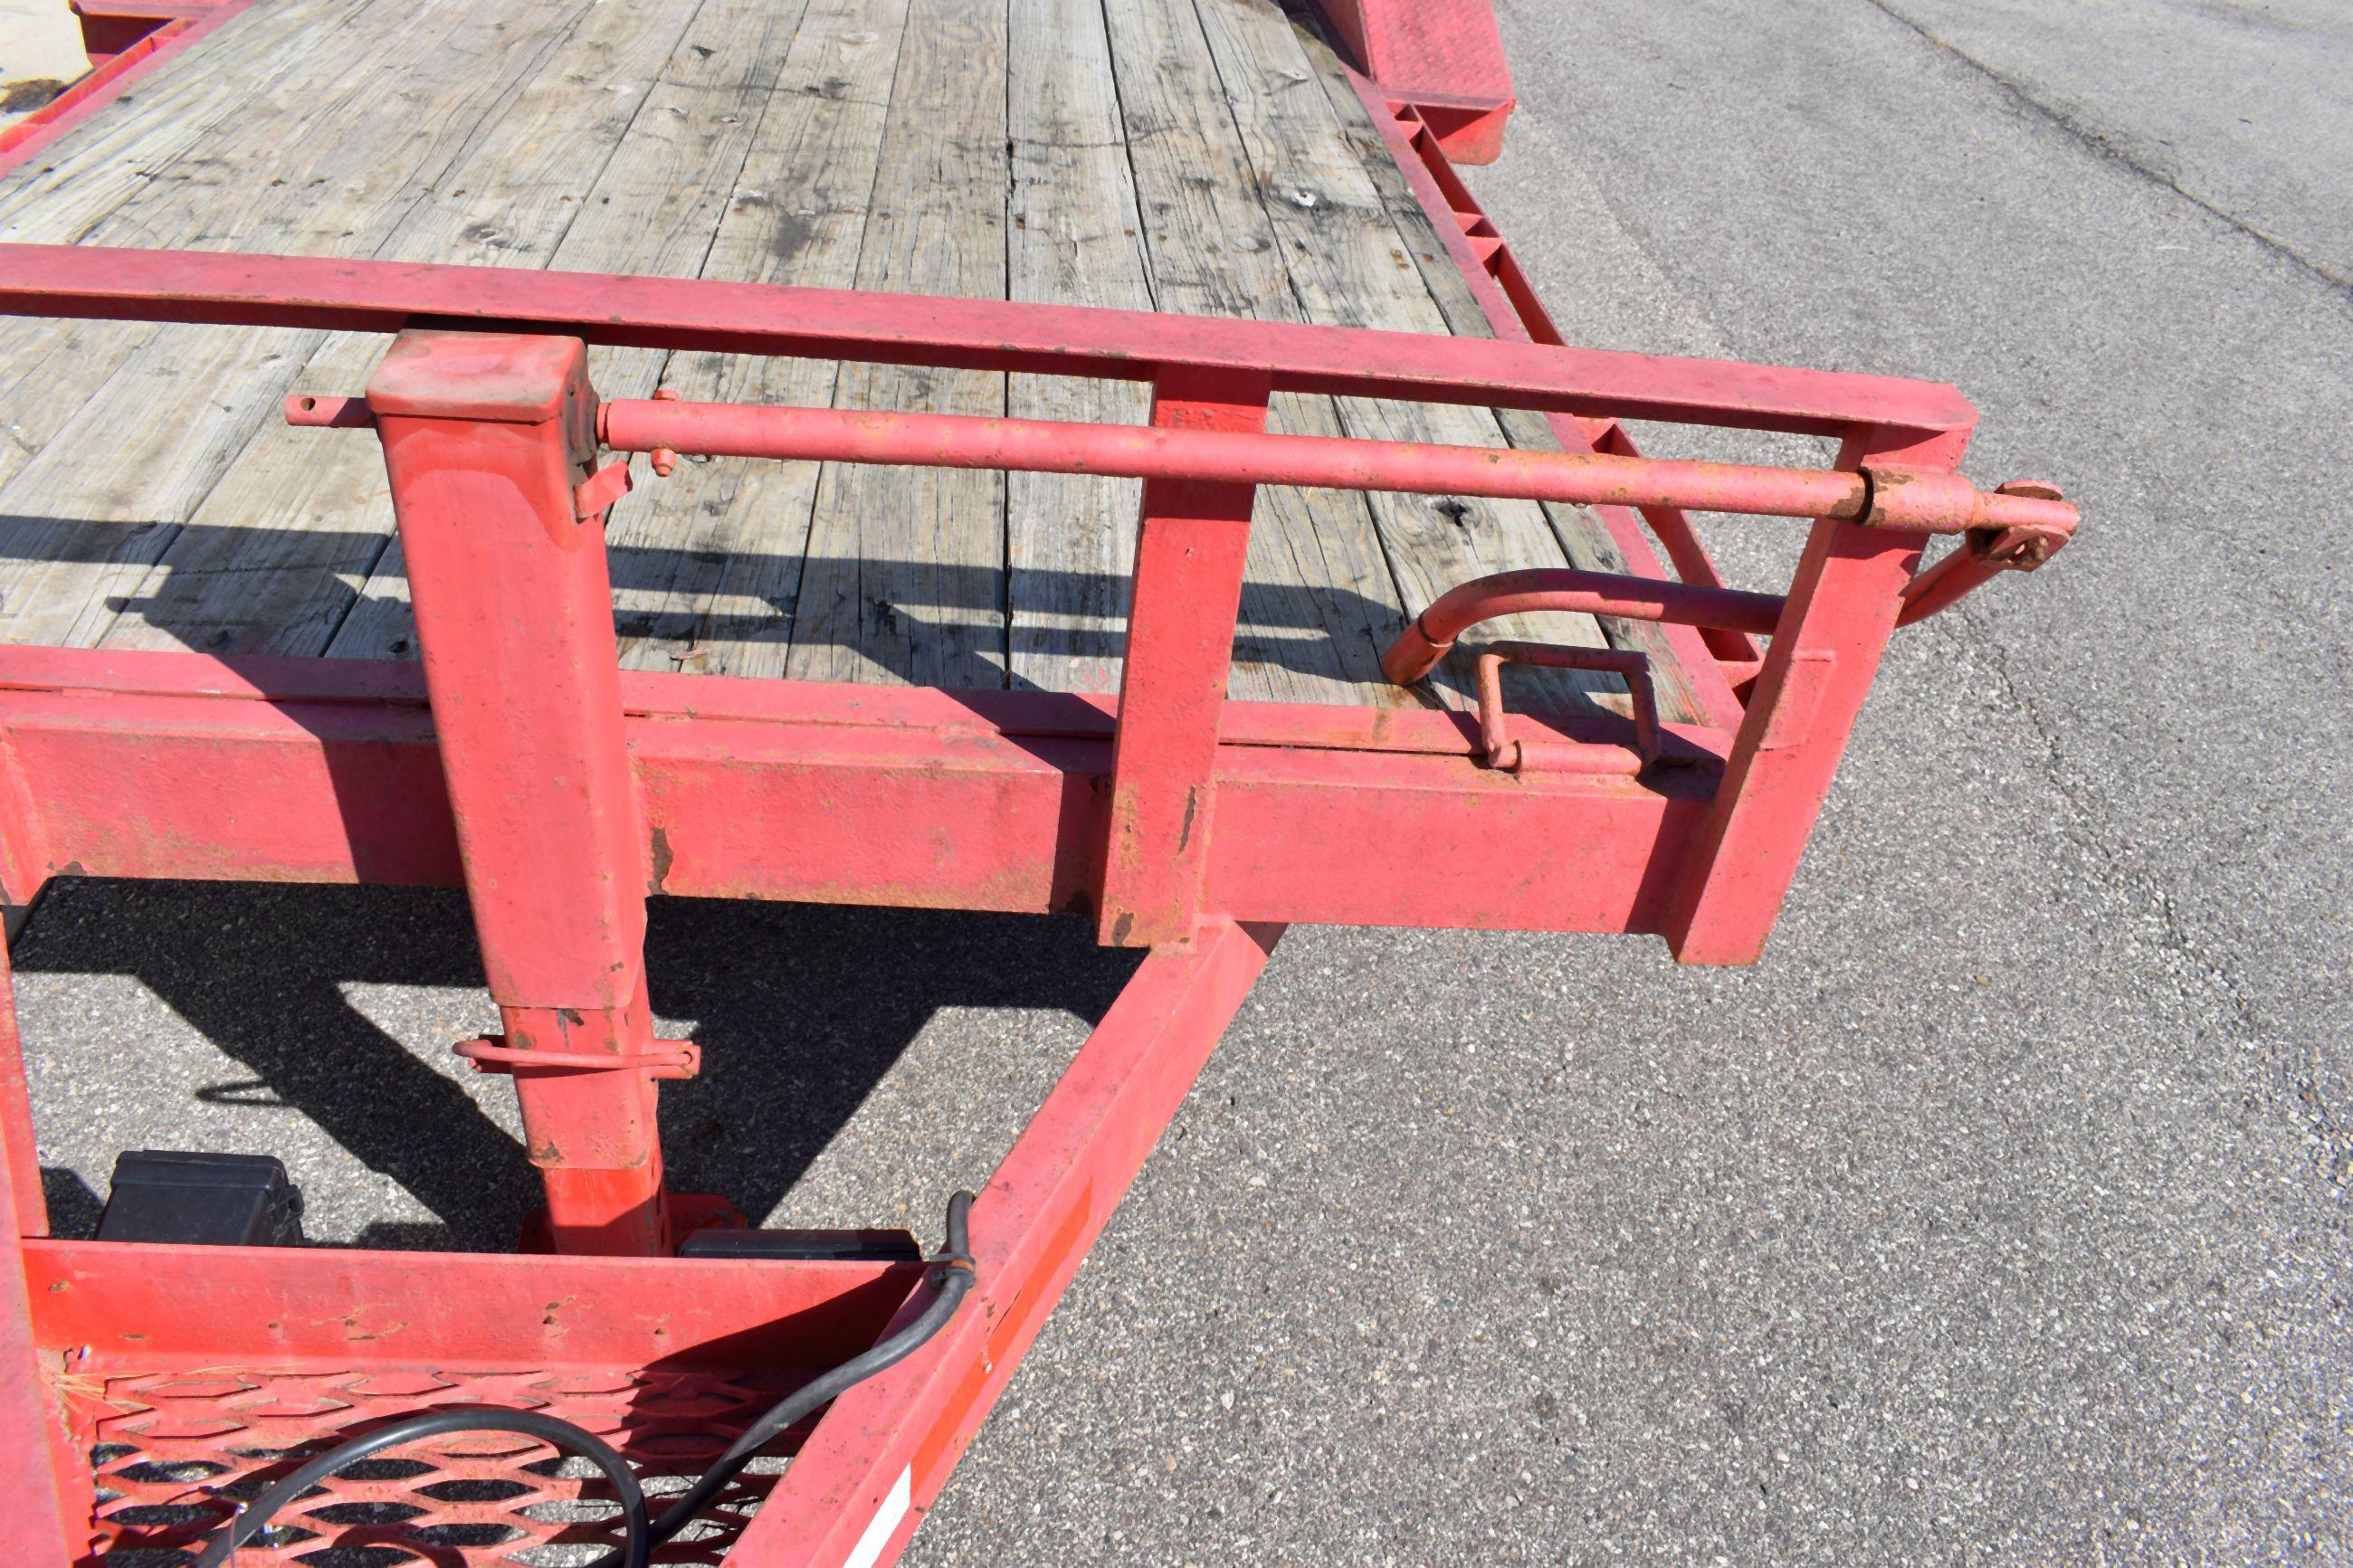 2003 S&S Flat Bed Tandem Axle Trailer 18’ Bed, 2’ Beaver Tail, 2 5/16” Ball Hitch, 16" Tires, Lights